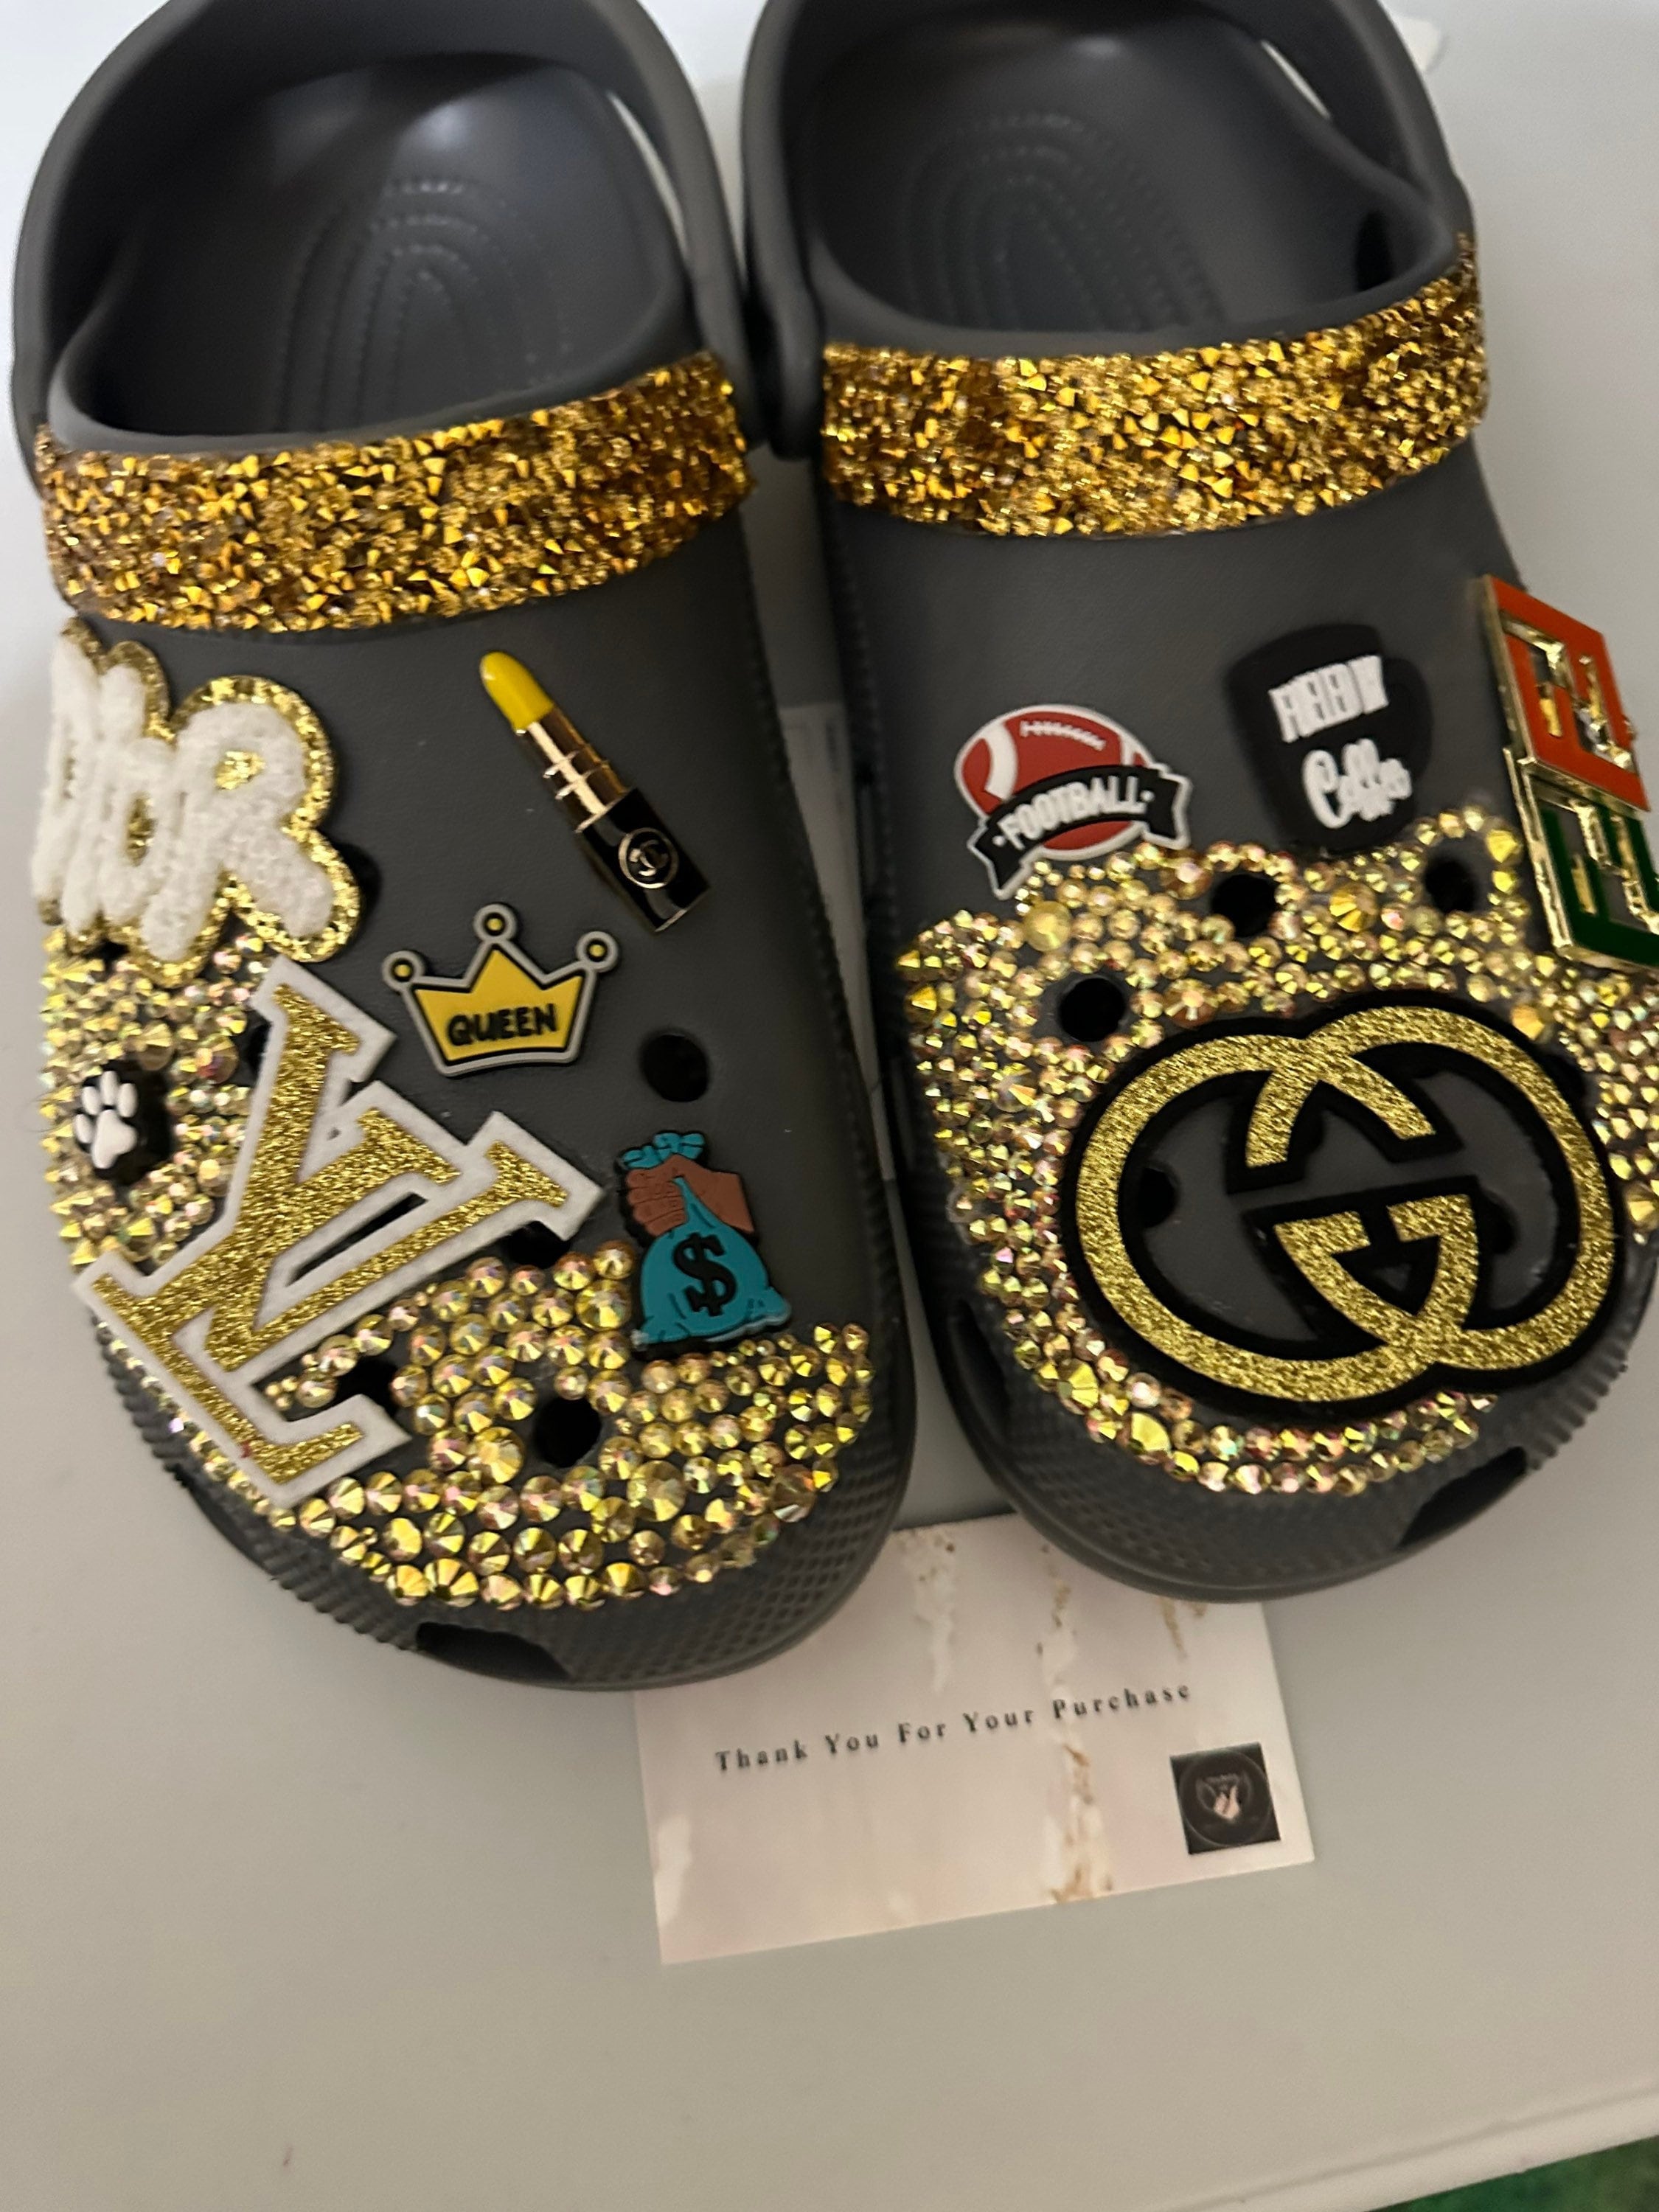 Gucci theme croc  Bedazzled shoes diy, Diy clothes and shoes